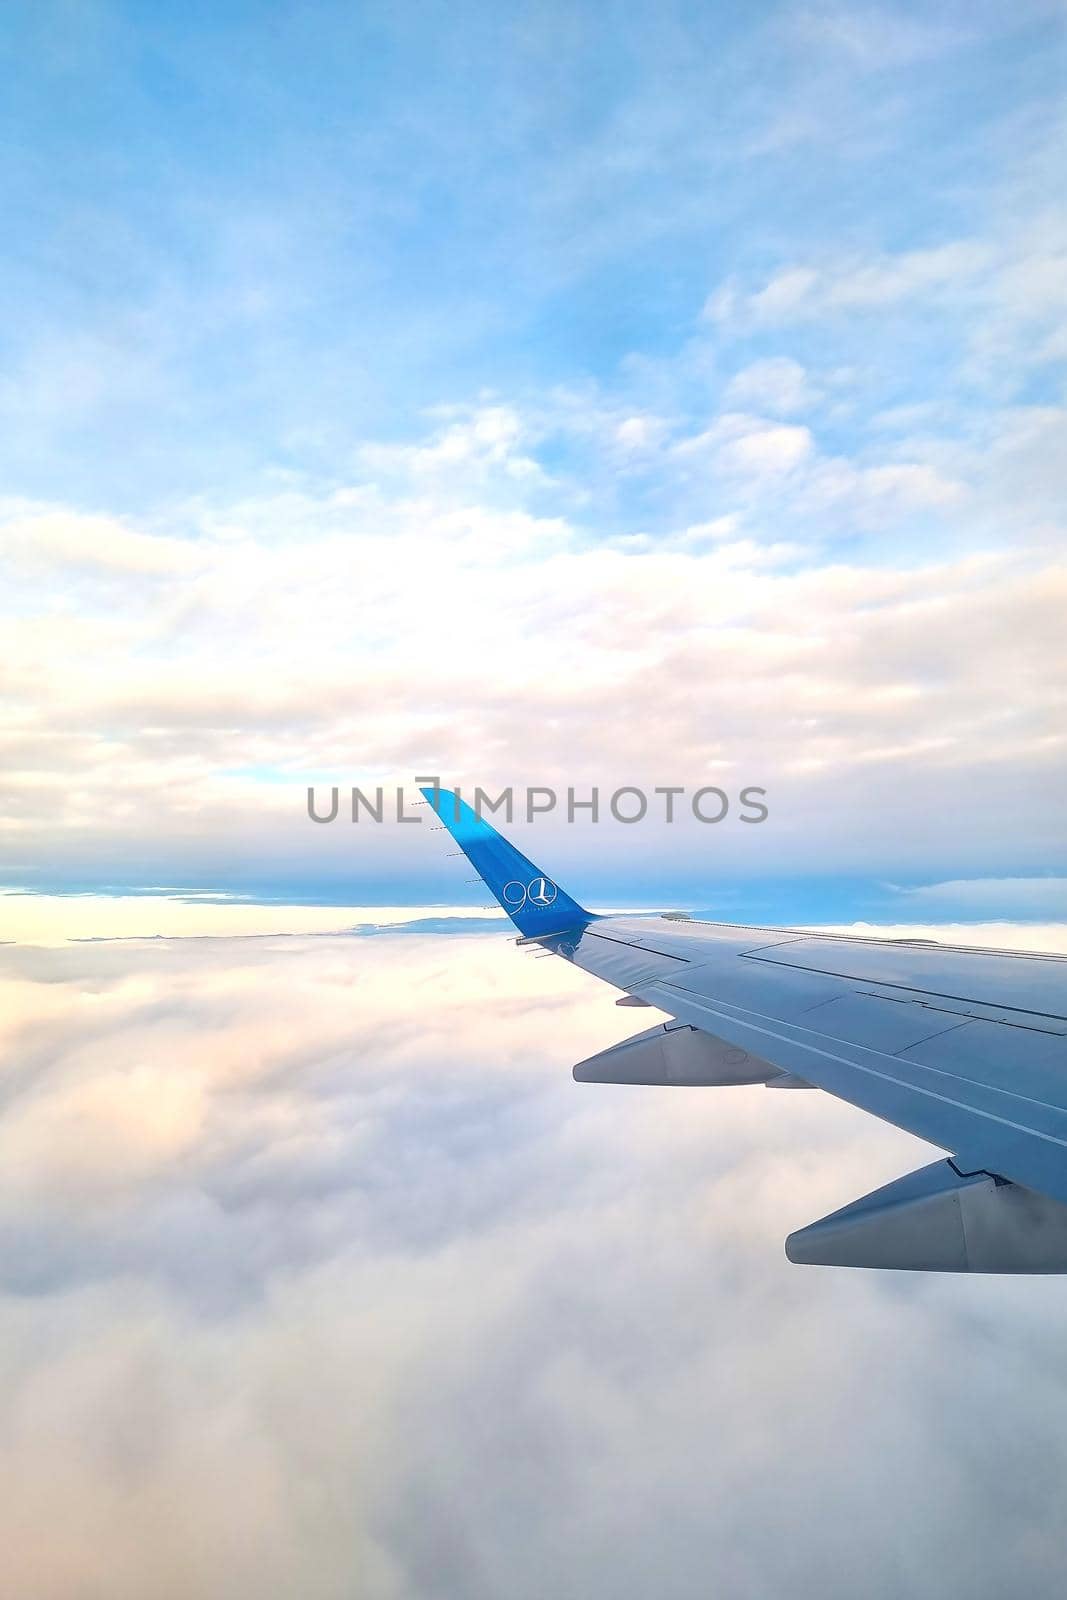 London, United Kingdom, February 4, 2022: beautiful view of the clouds from a flying plane